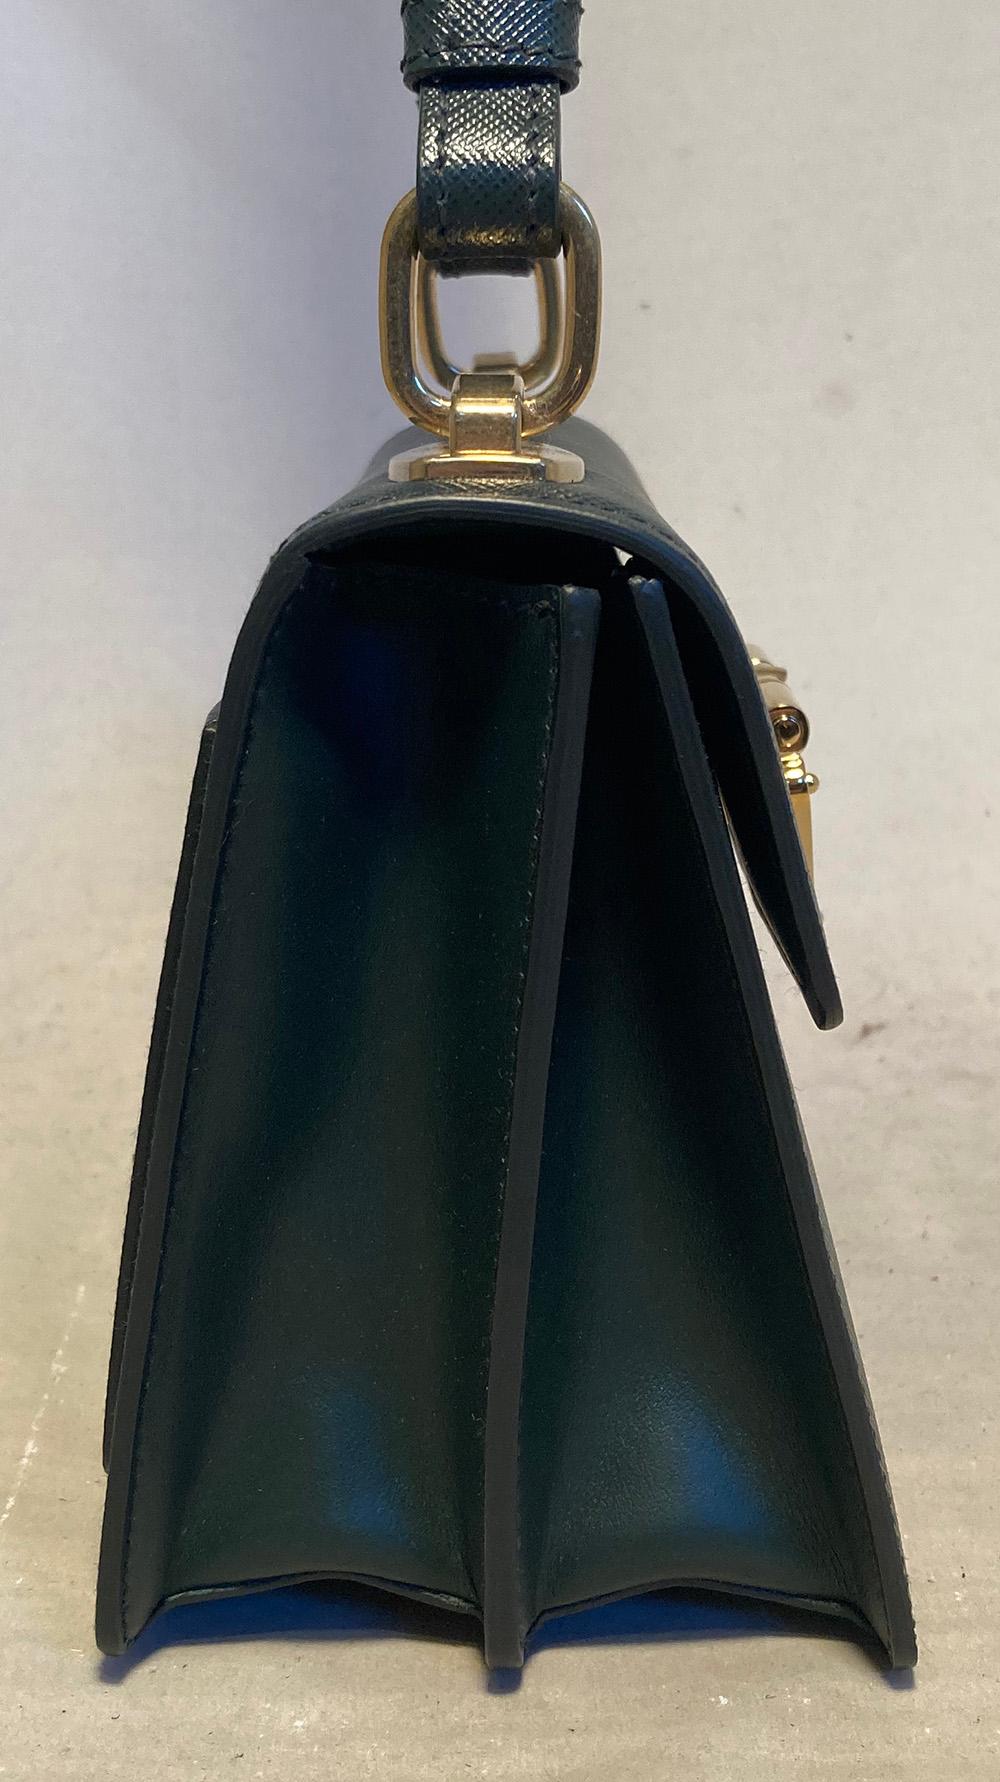 New without tags. grained saffiano leather in dark emerald green trimmed with gold hardware and back side slit pocket. signature triangle logo latch closure opens single flap style to a matching green leather interior with 2 separate compartments.